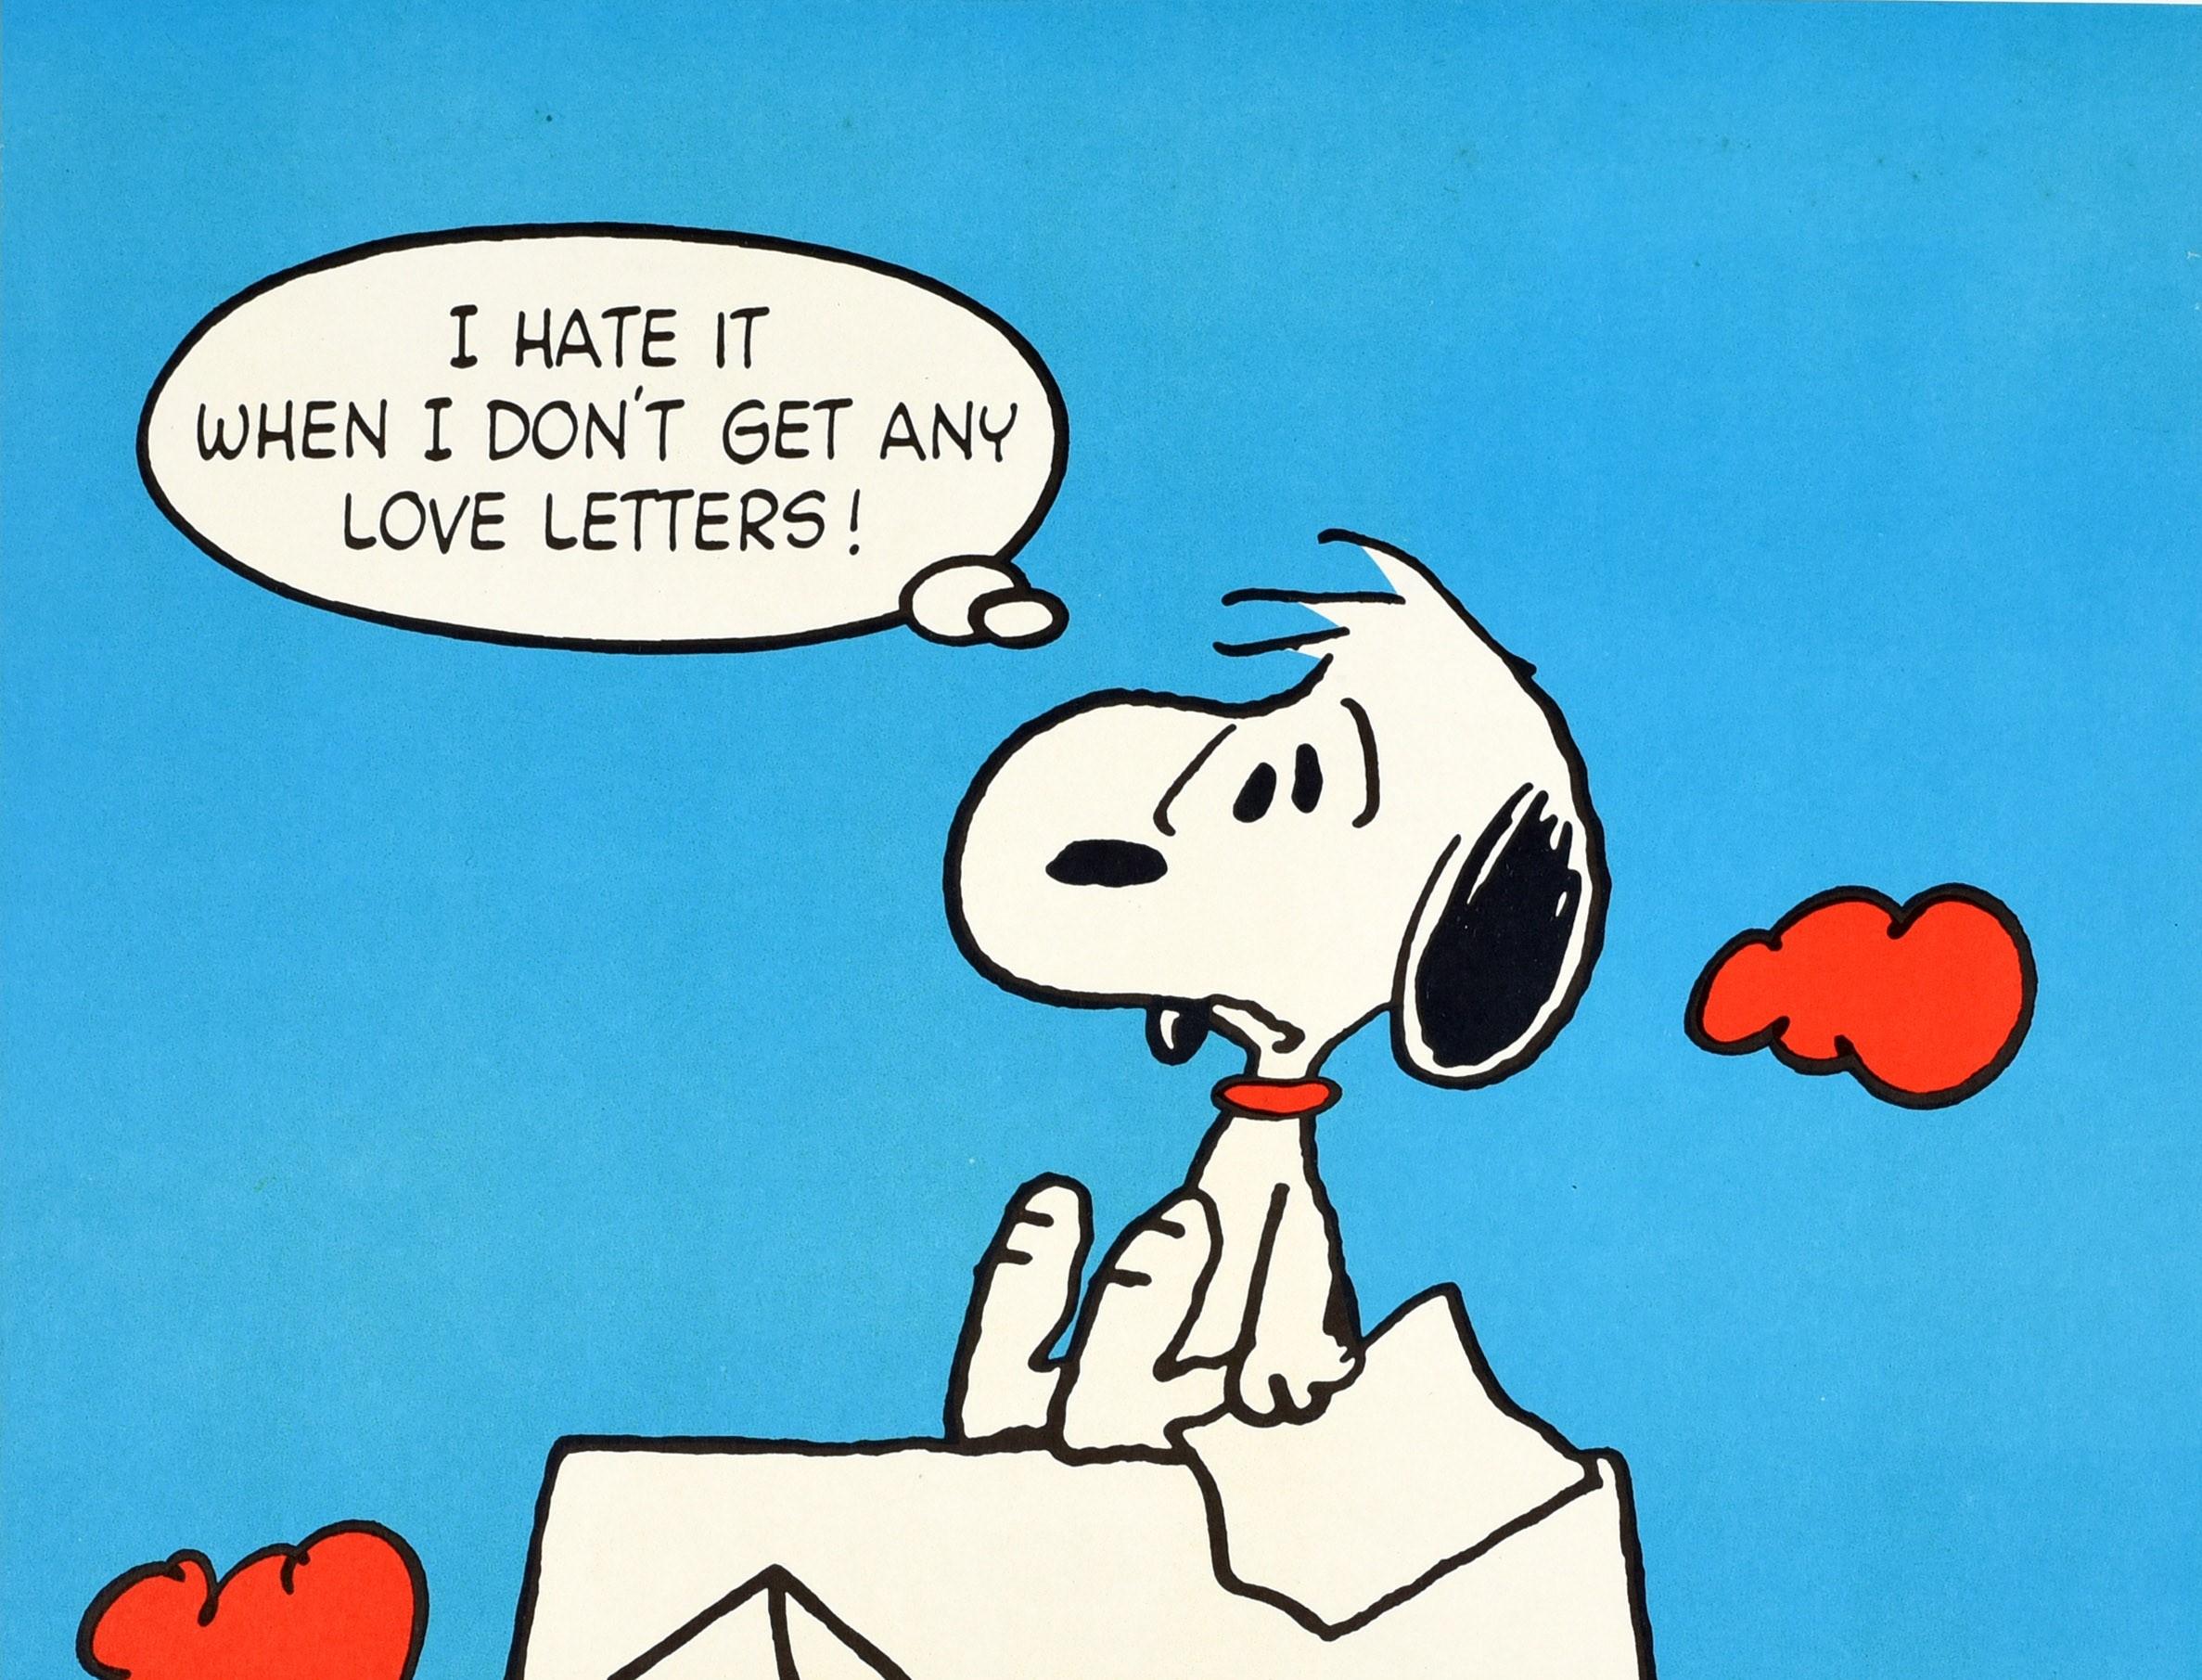 Original Vintage Poster I Hate It When I Don't Get Any Love Letters Snoopy Dog - Print by Charles M. Schulz